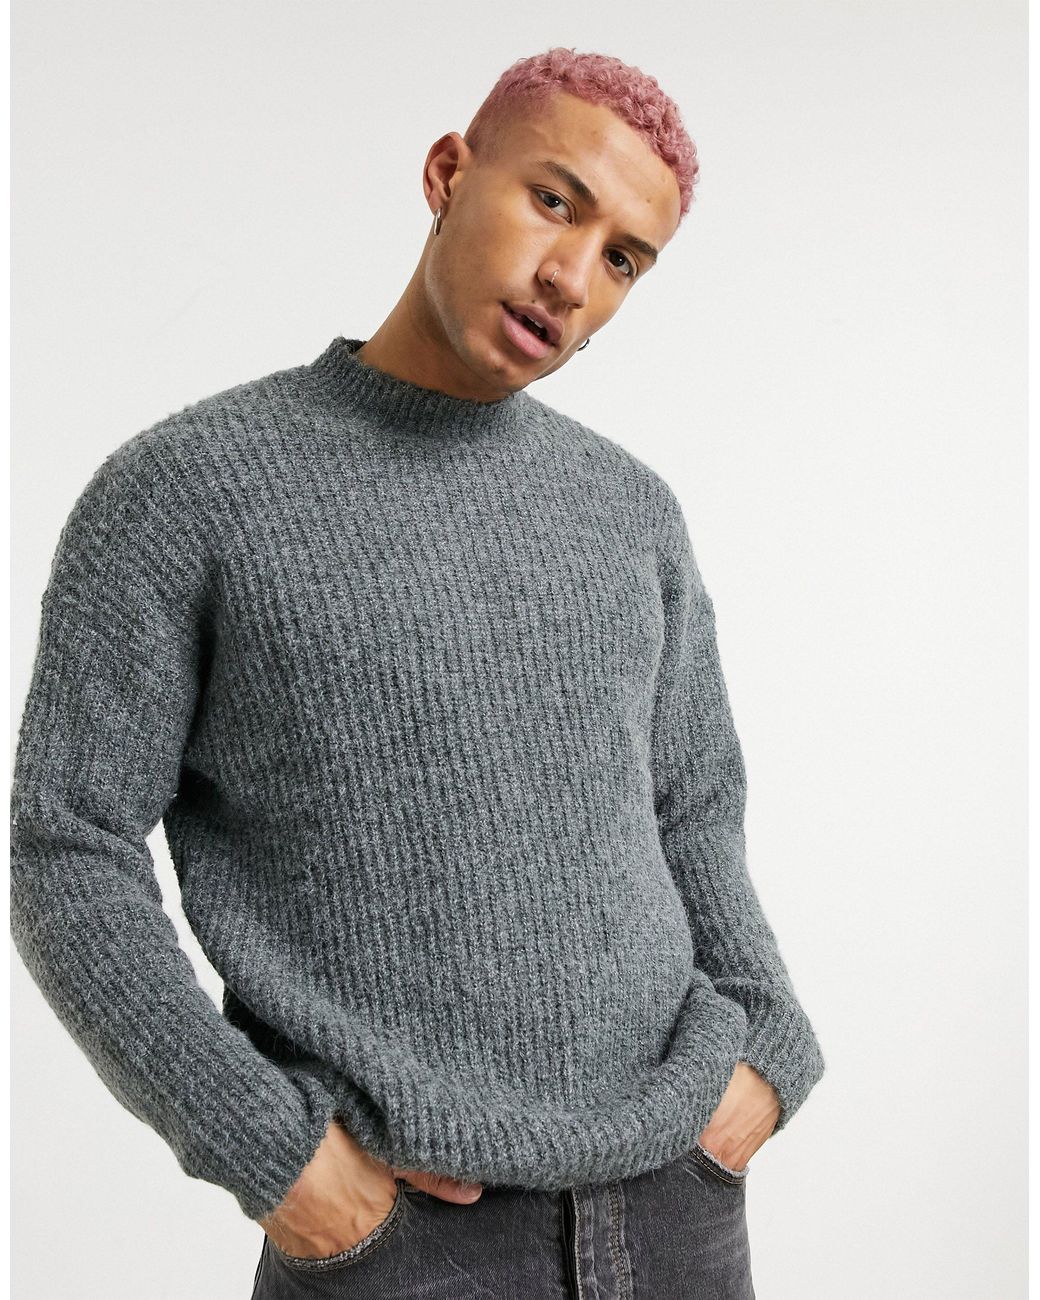 Pull&Bear Ribbed Crew Neck Sweater in Brown for Men - Lyst